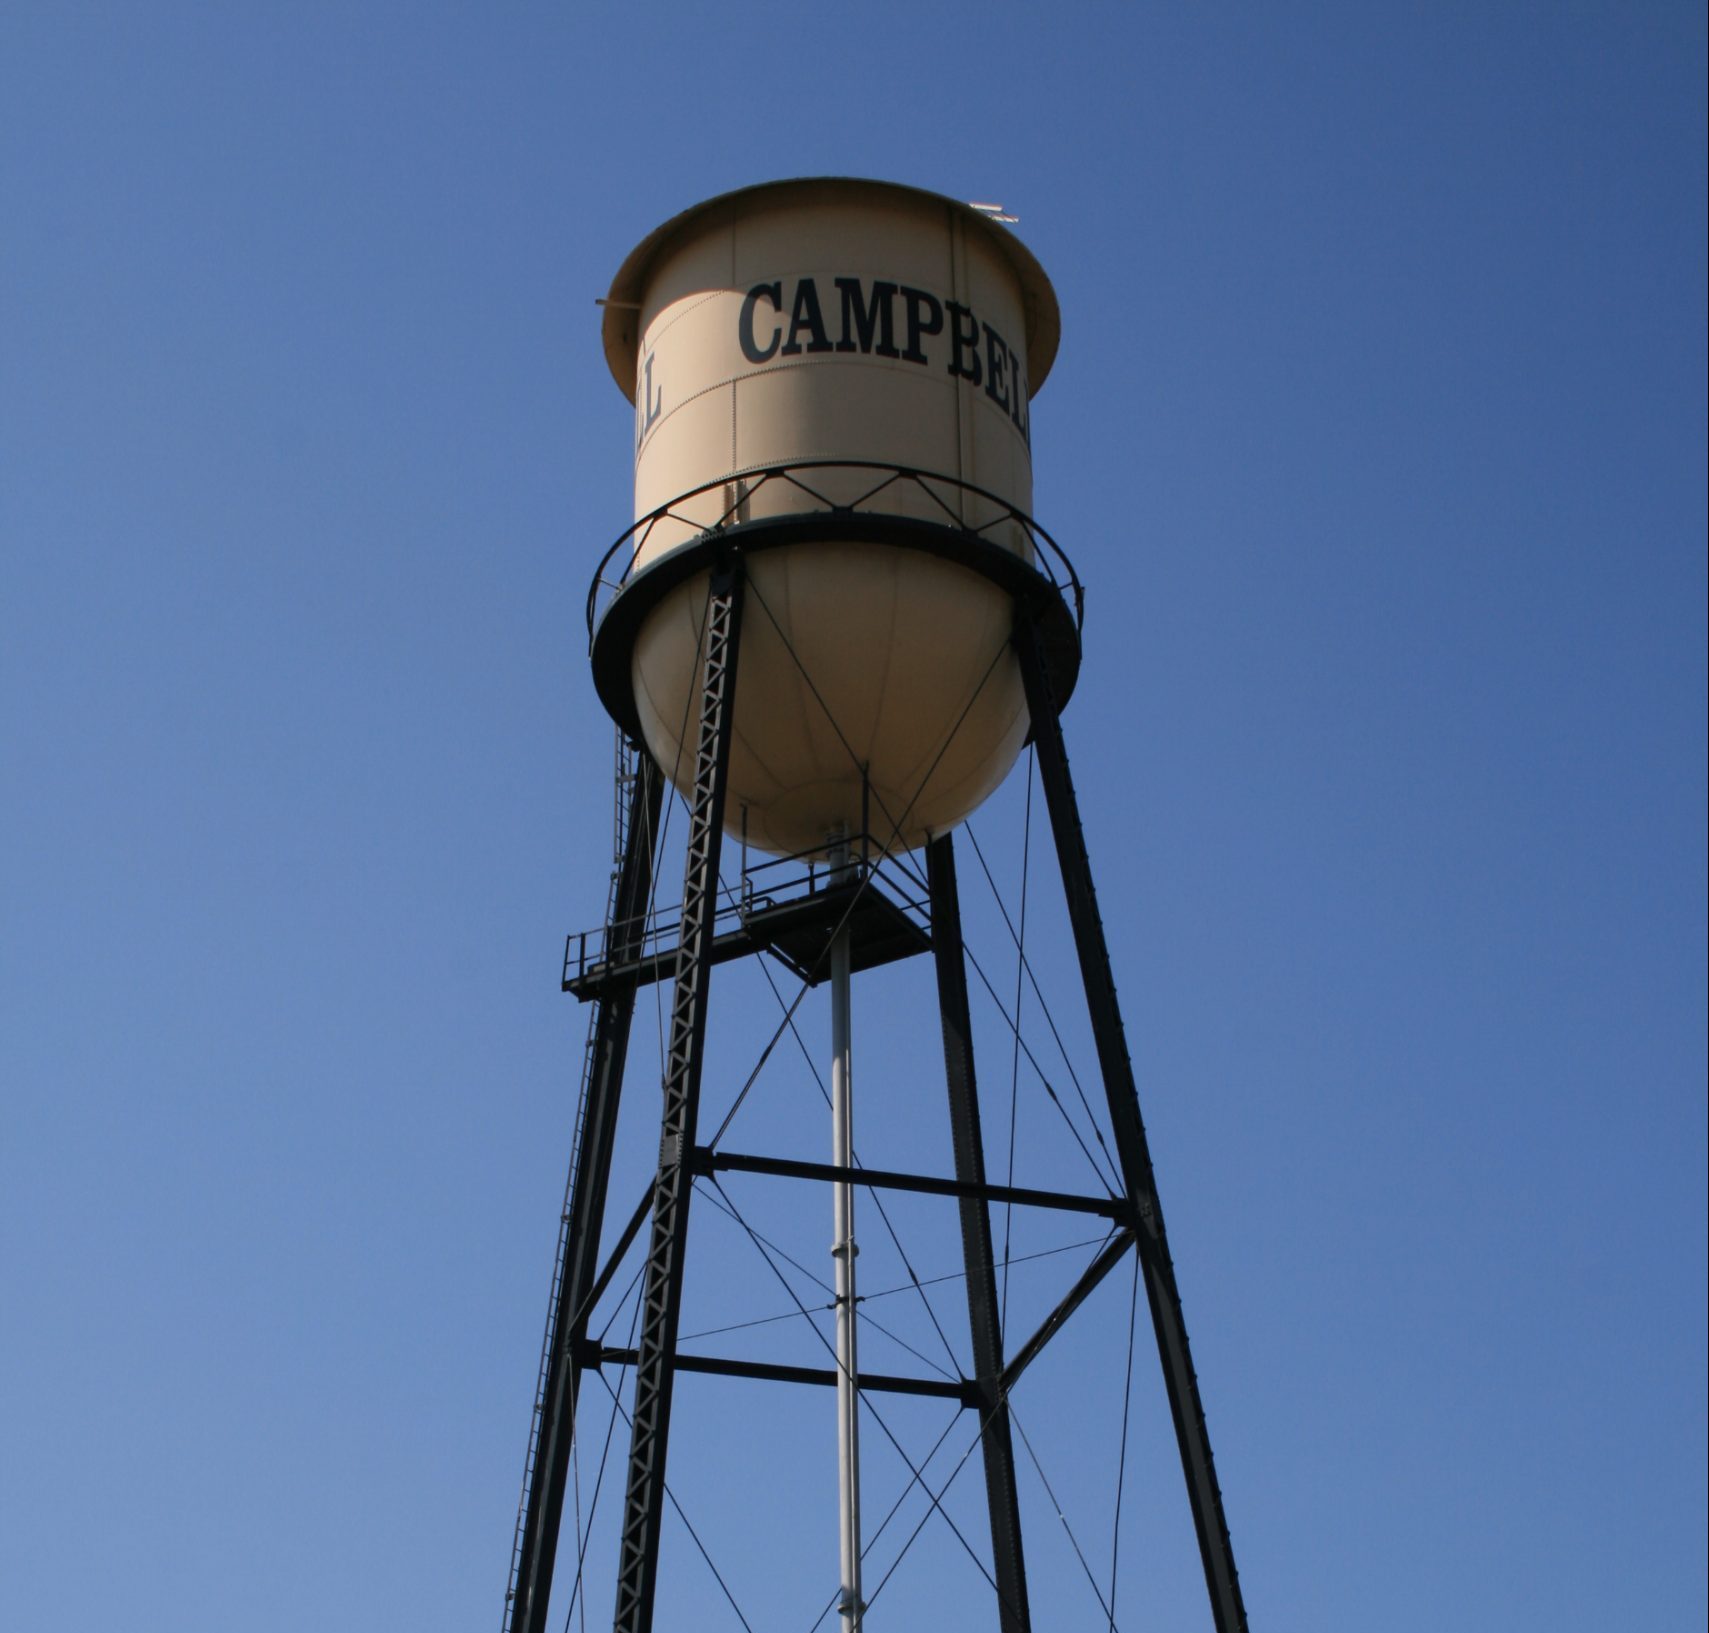 The campbell water tower